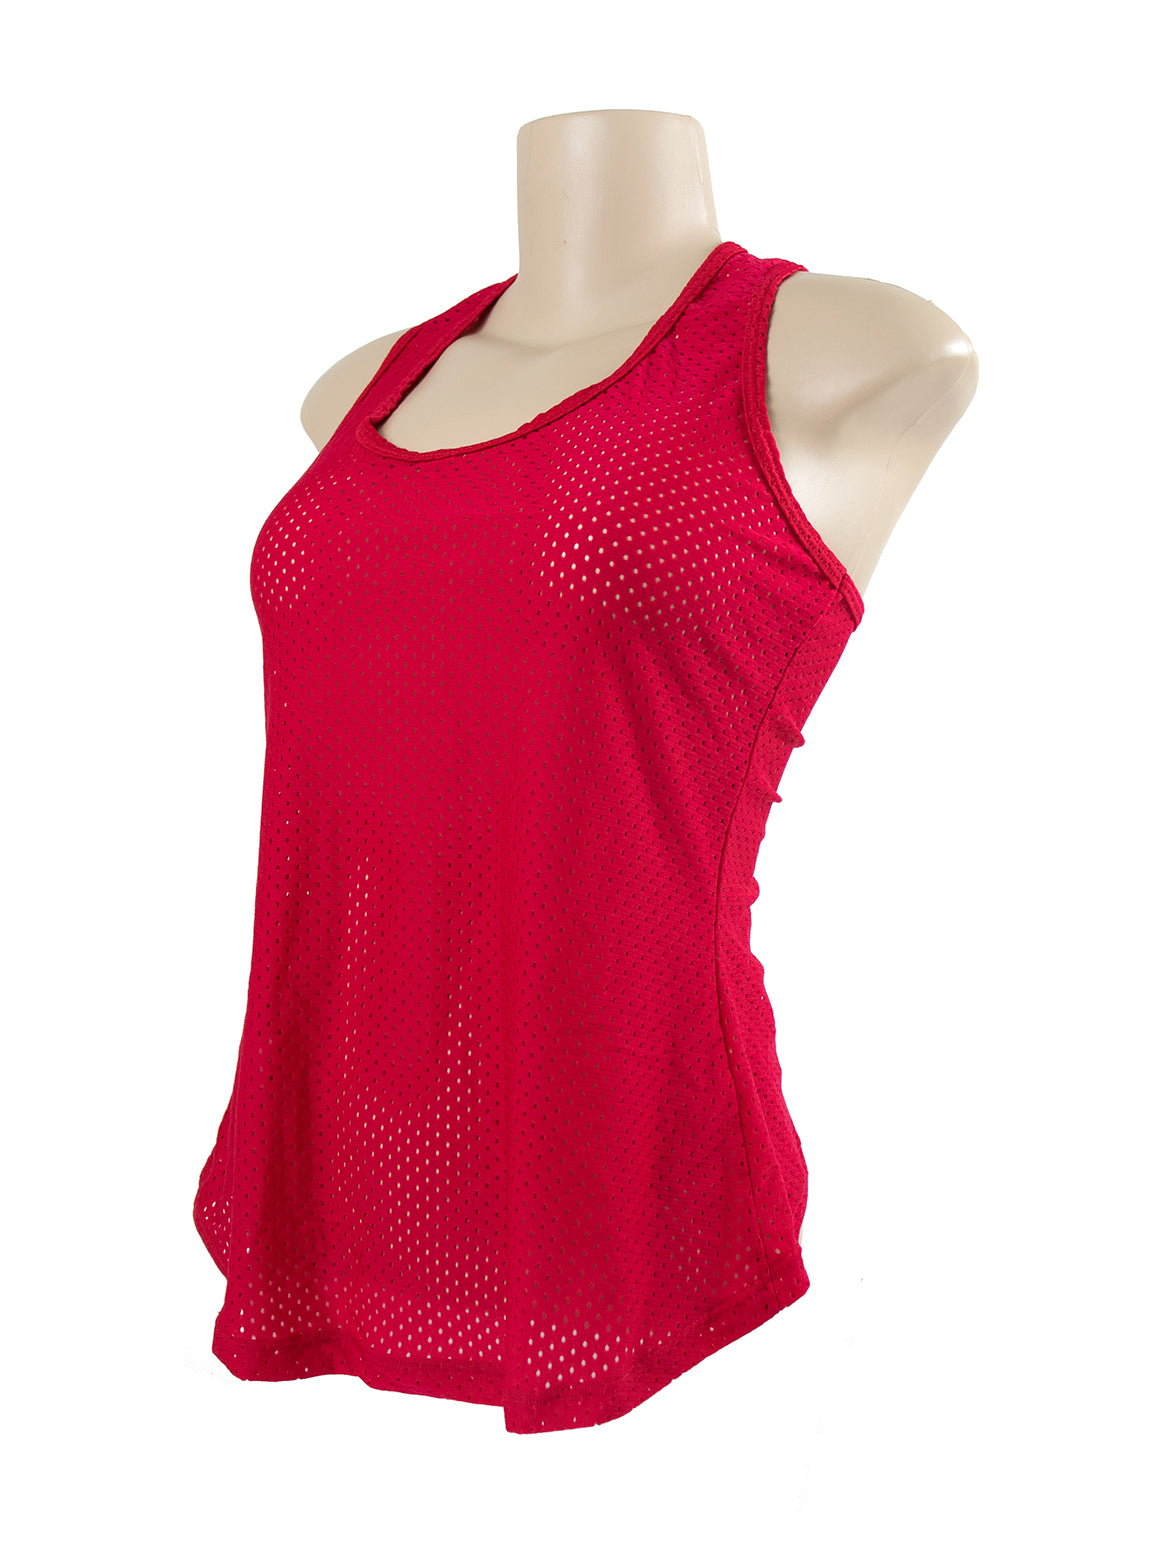 Mesh Fitness Top with Tie